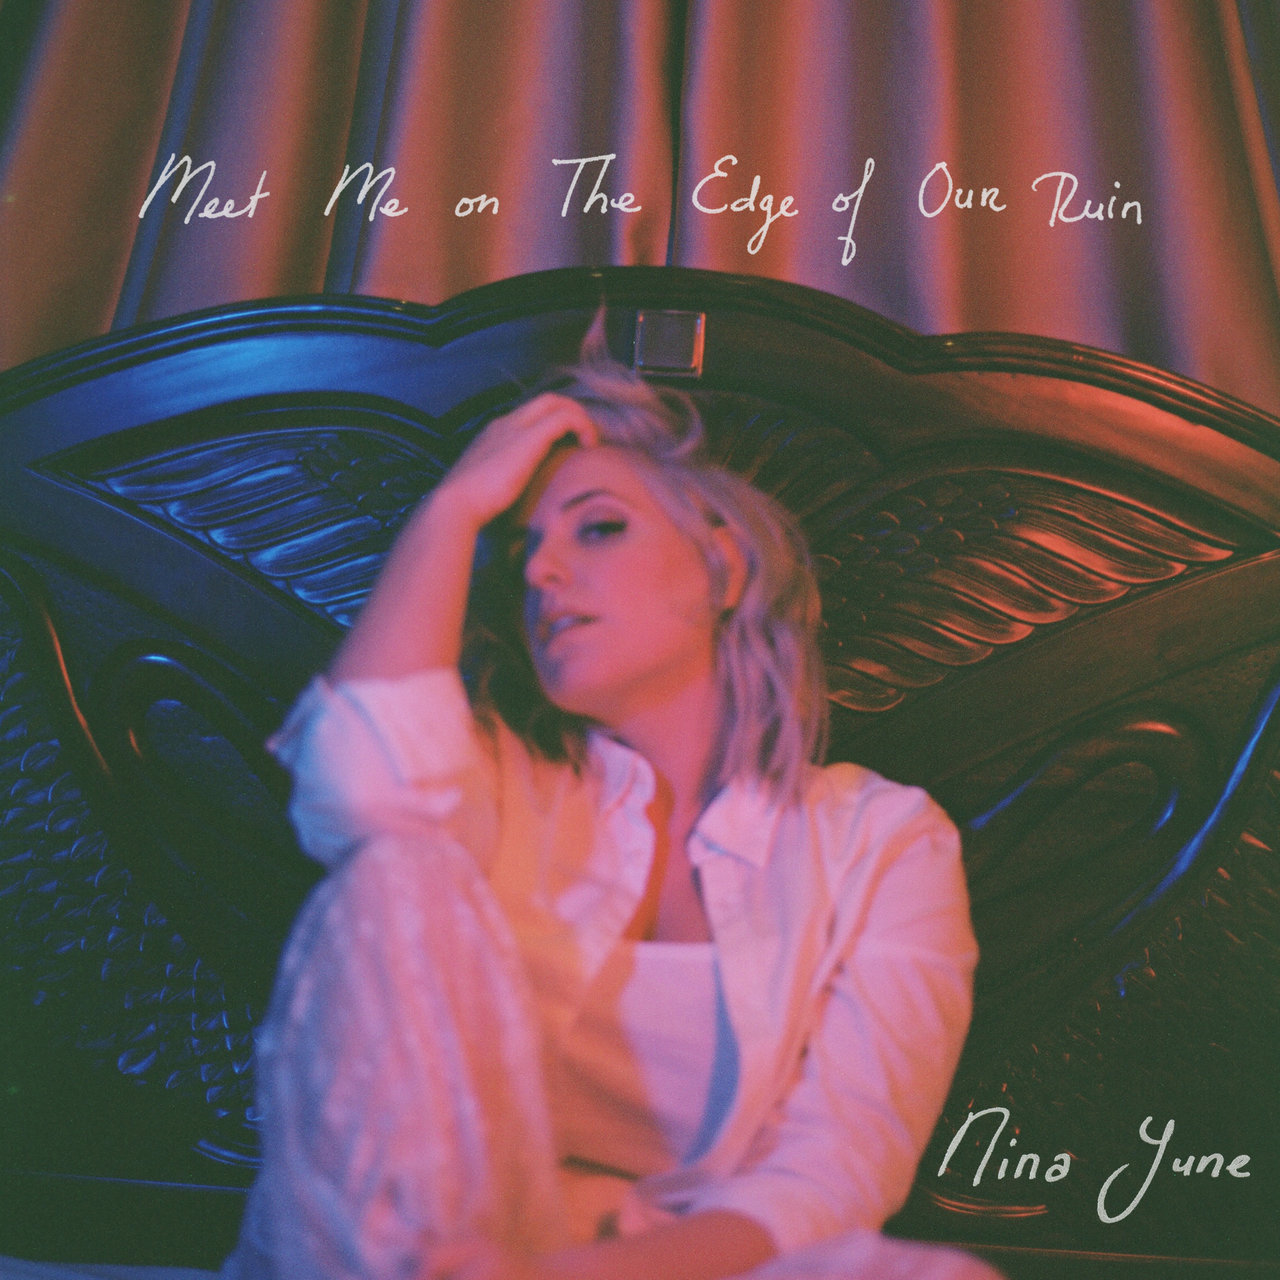 Nina June – 2021 - Meet Me on the Edge of Our Ruin